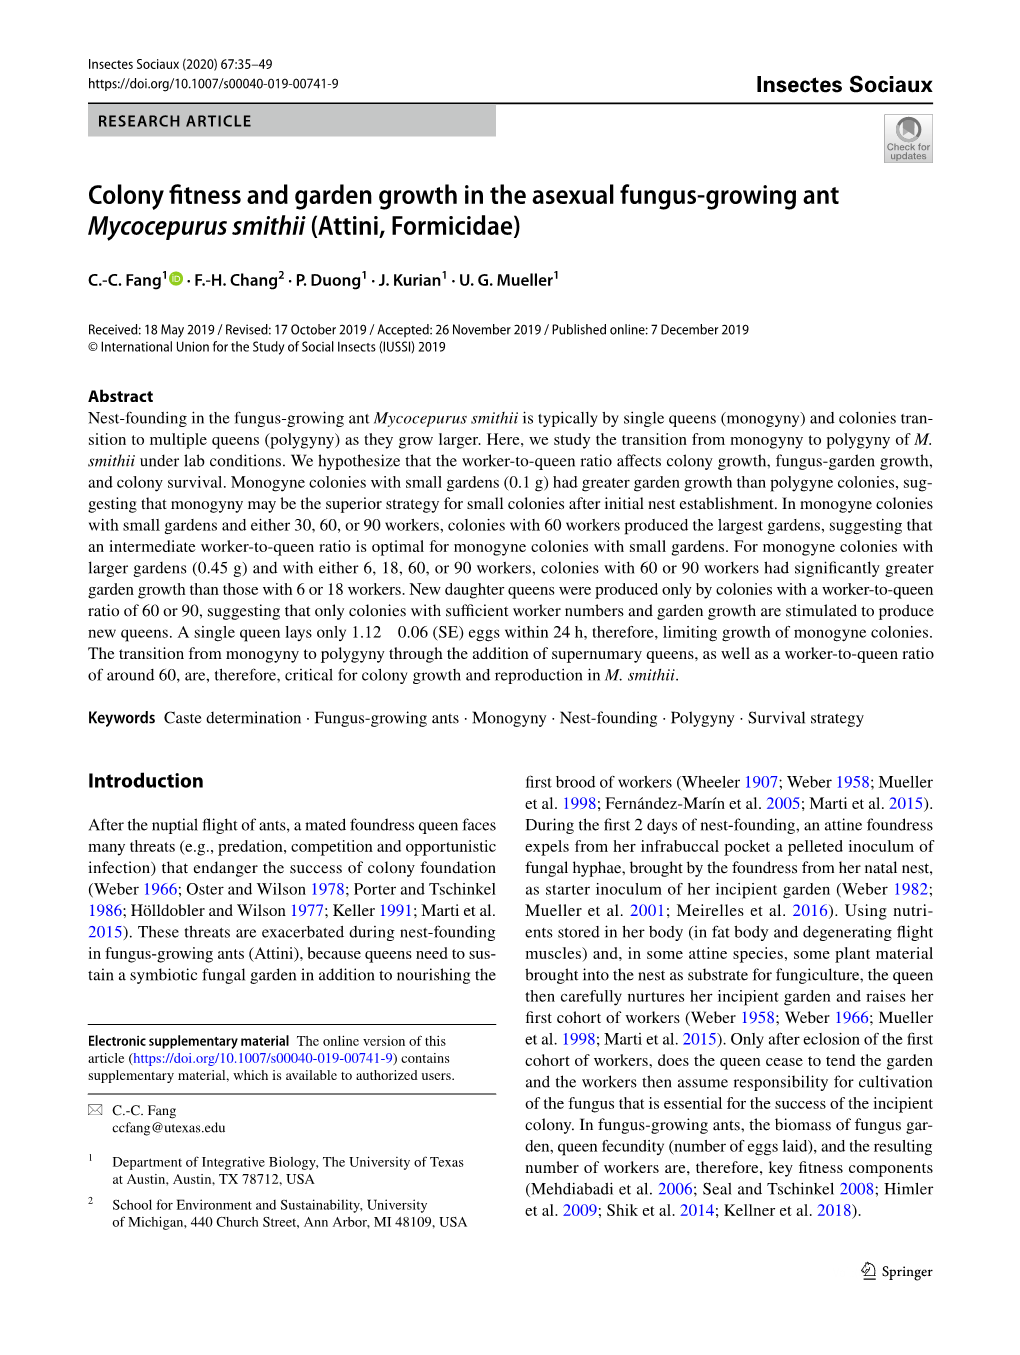 Colony Fitness and Garden Growth in the Asexual Fungus-Growing Ant